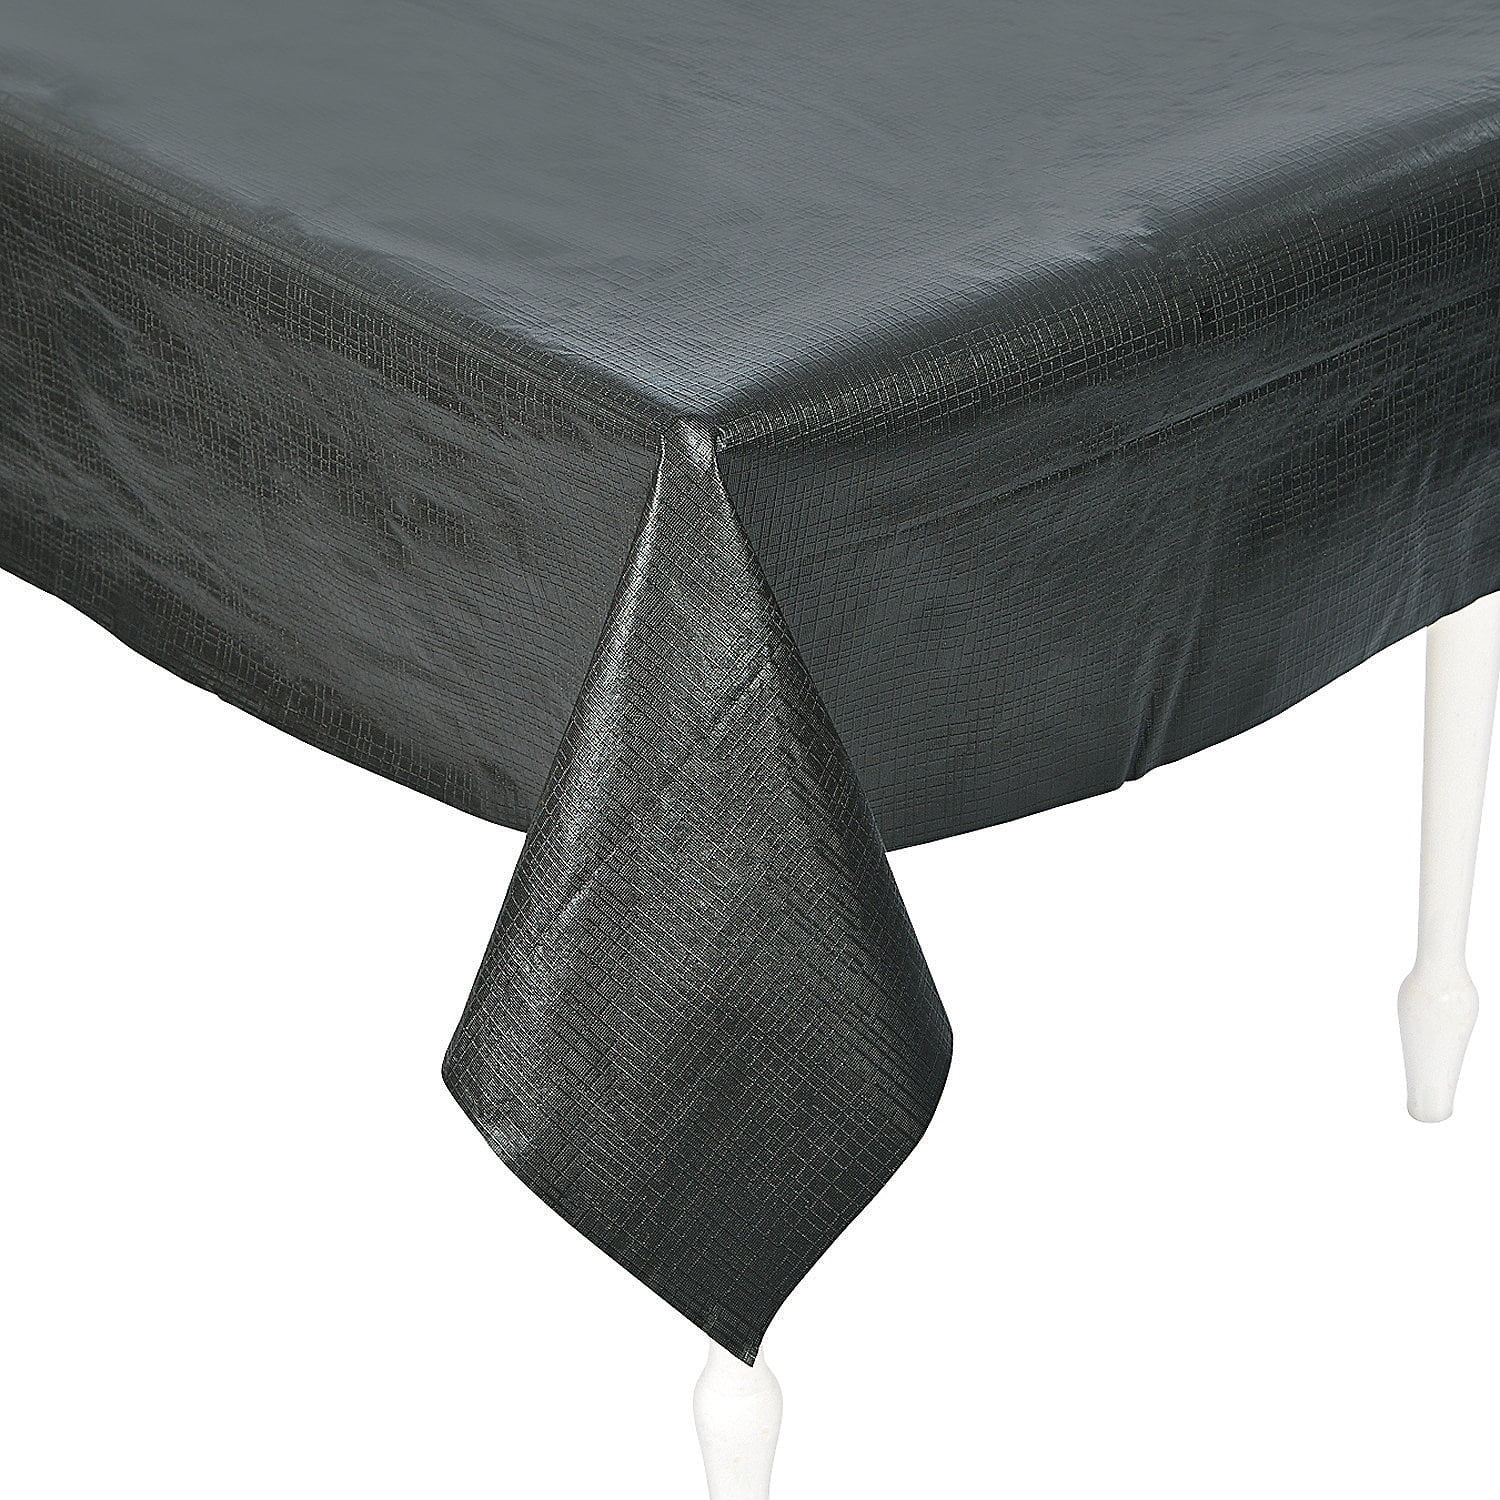 Black Flannel Back Vinyl Tablecover - Party Supplies - 1 Piece